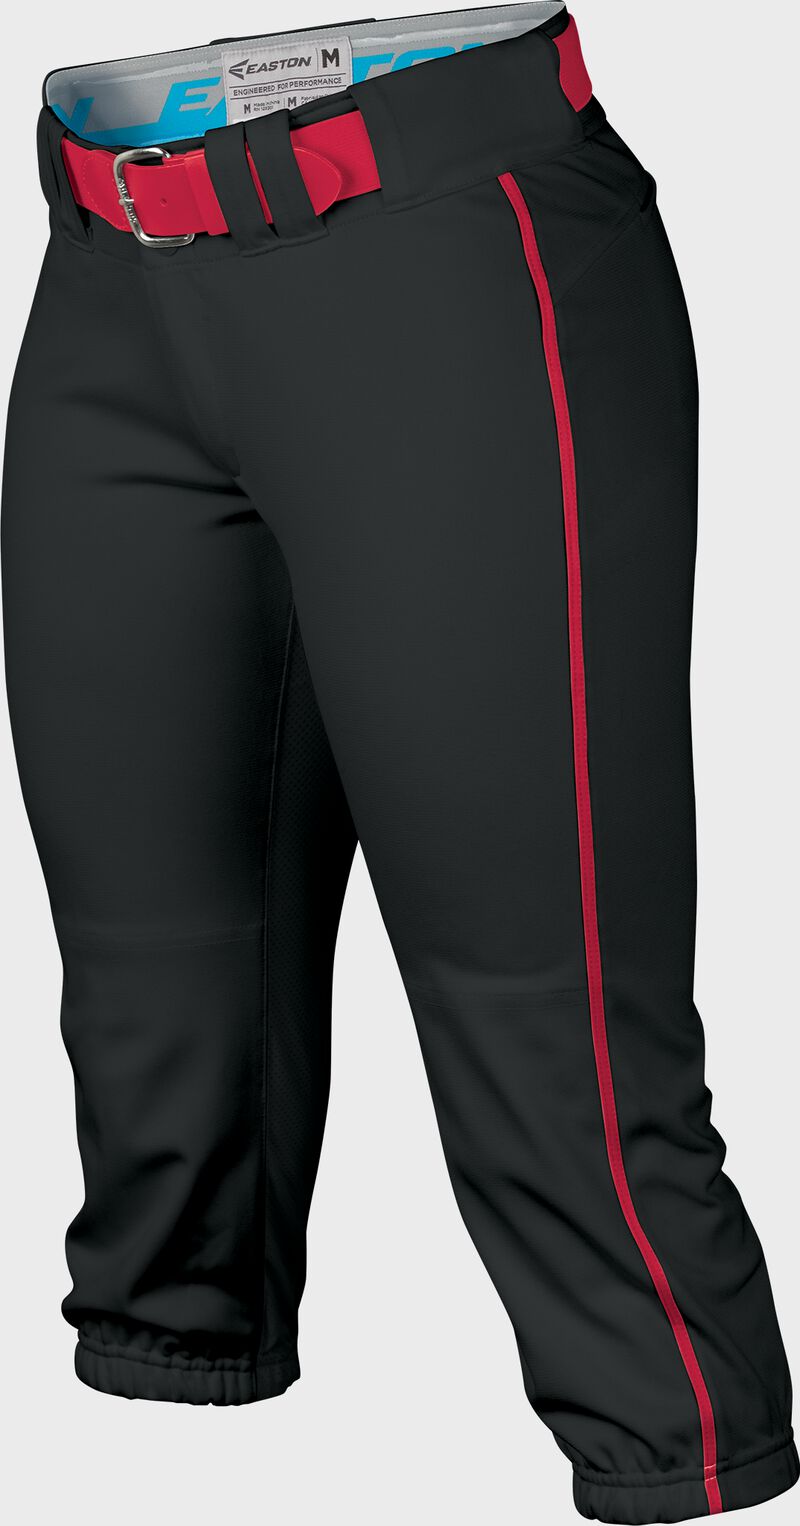 Easton Prowess Softball Pant Women's Piped BLACK/RED  M